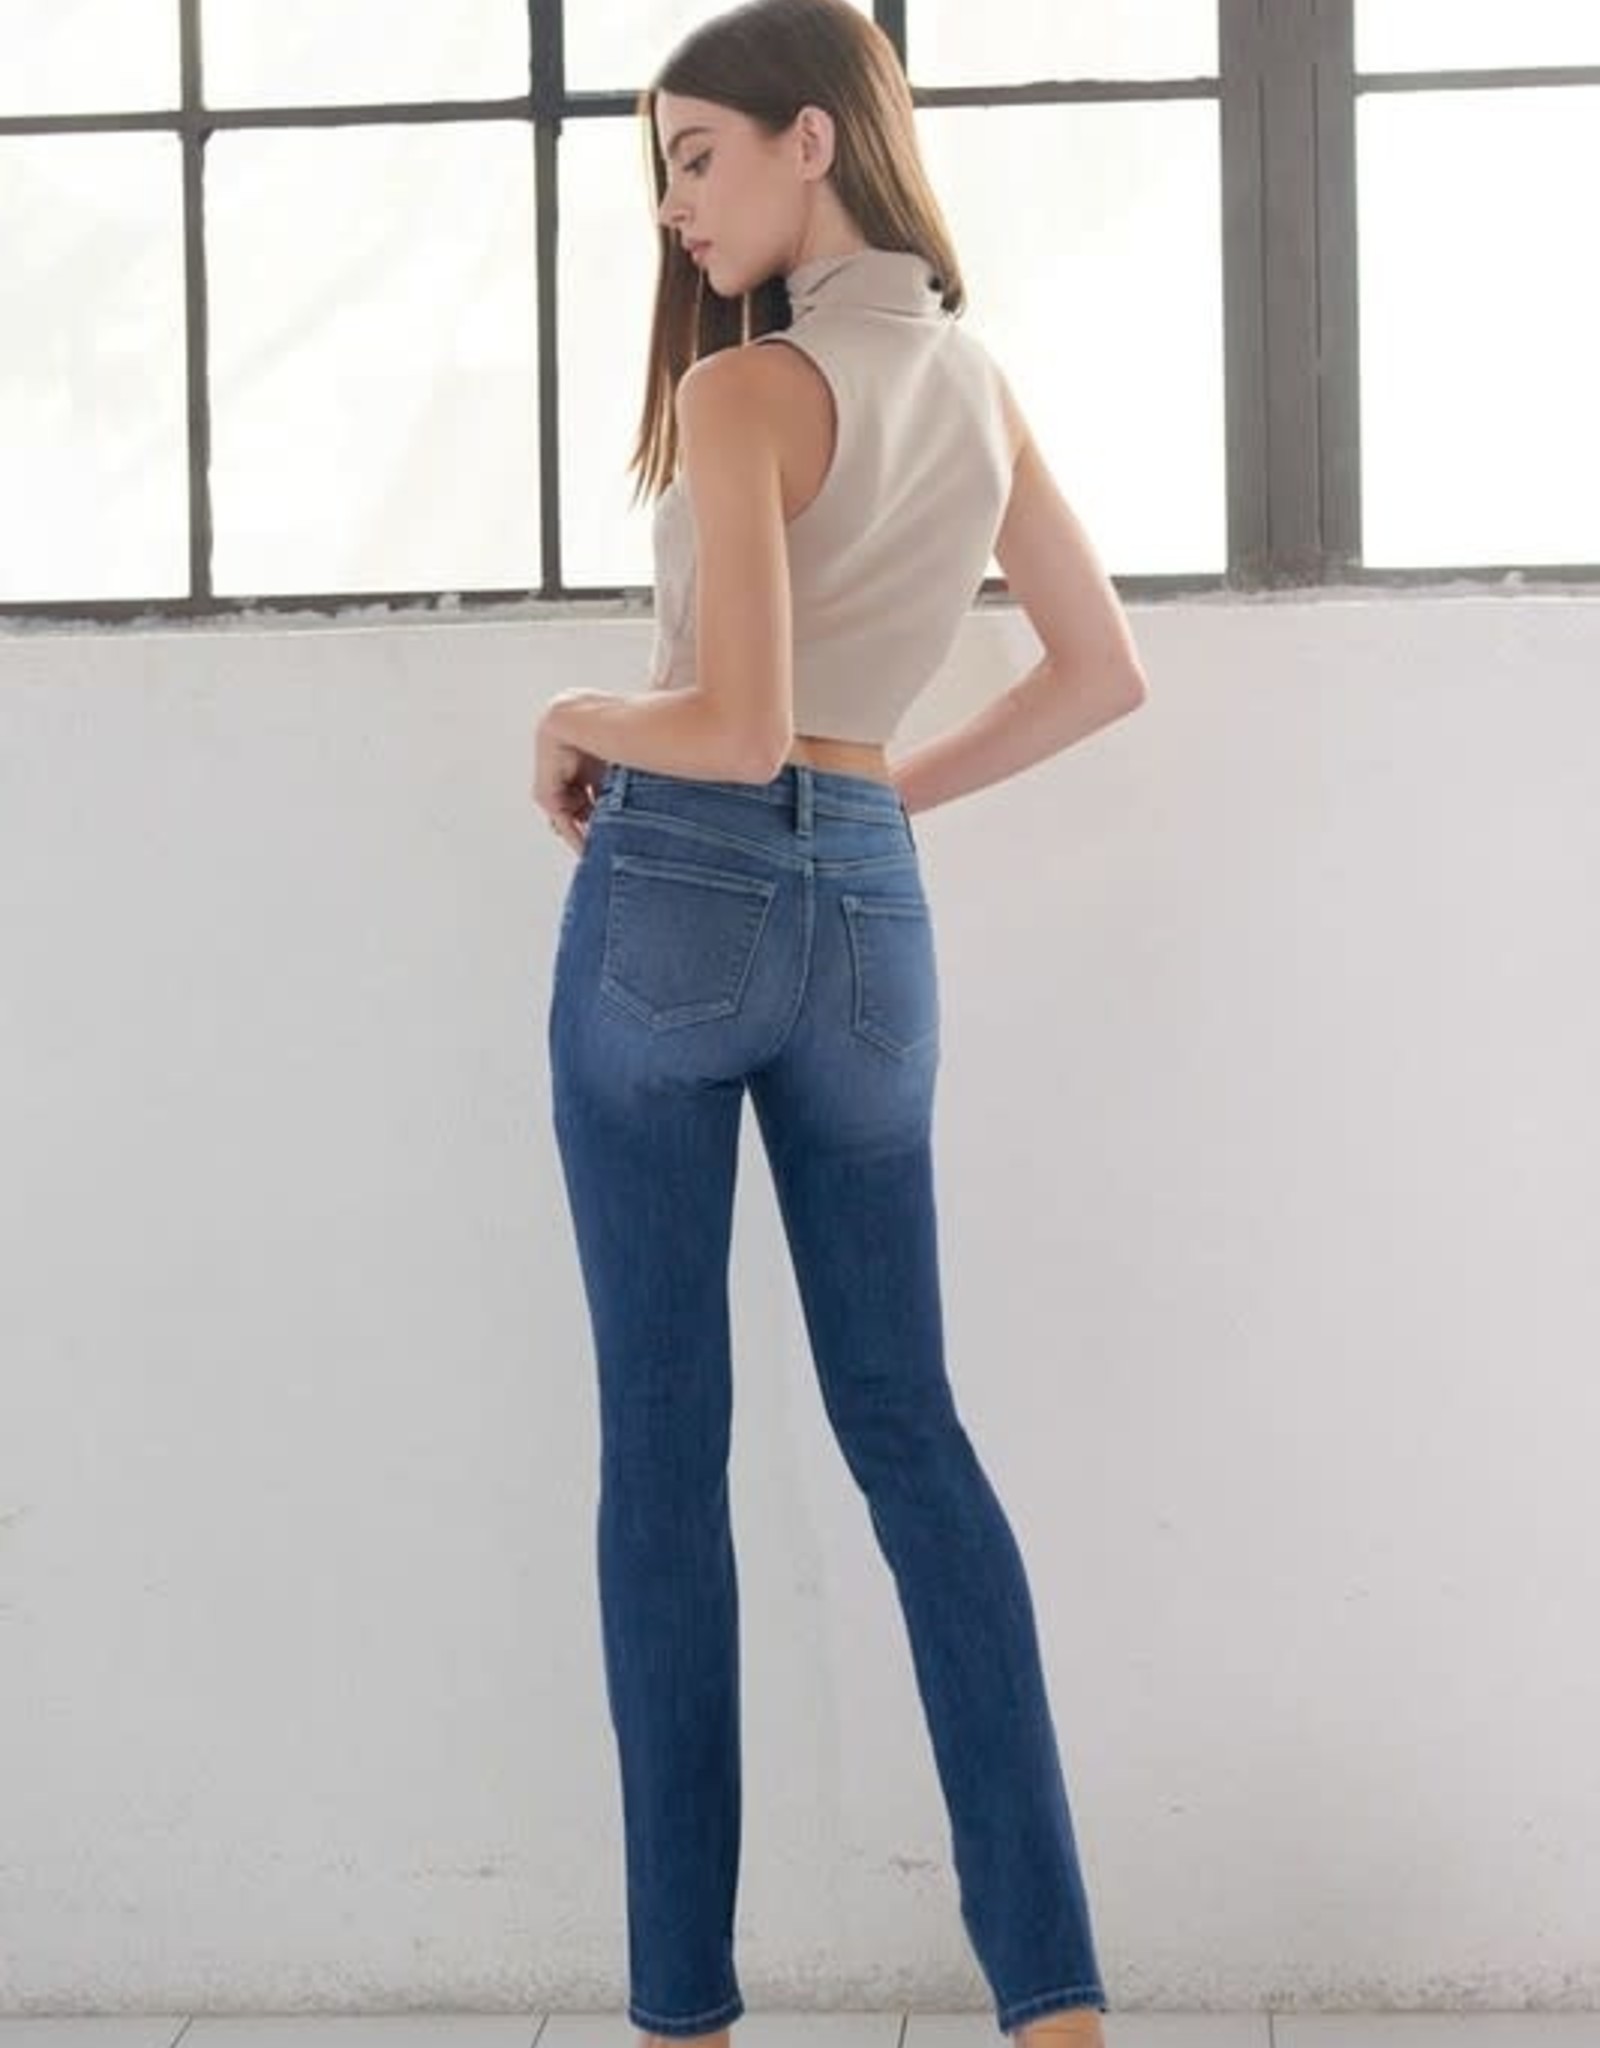 Miss Bliss High Rise Skinny Bootcut Jeans- Washed Blue